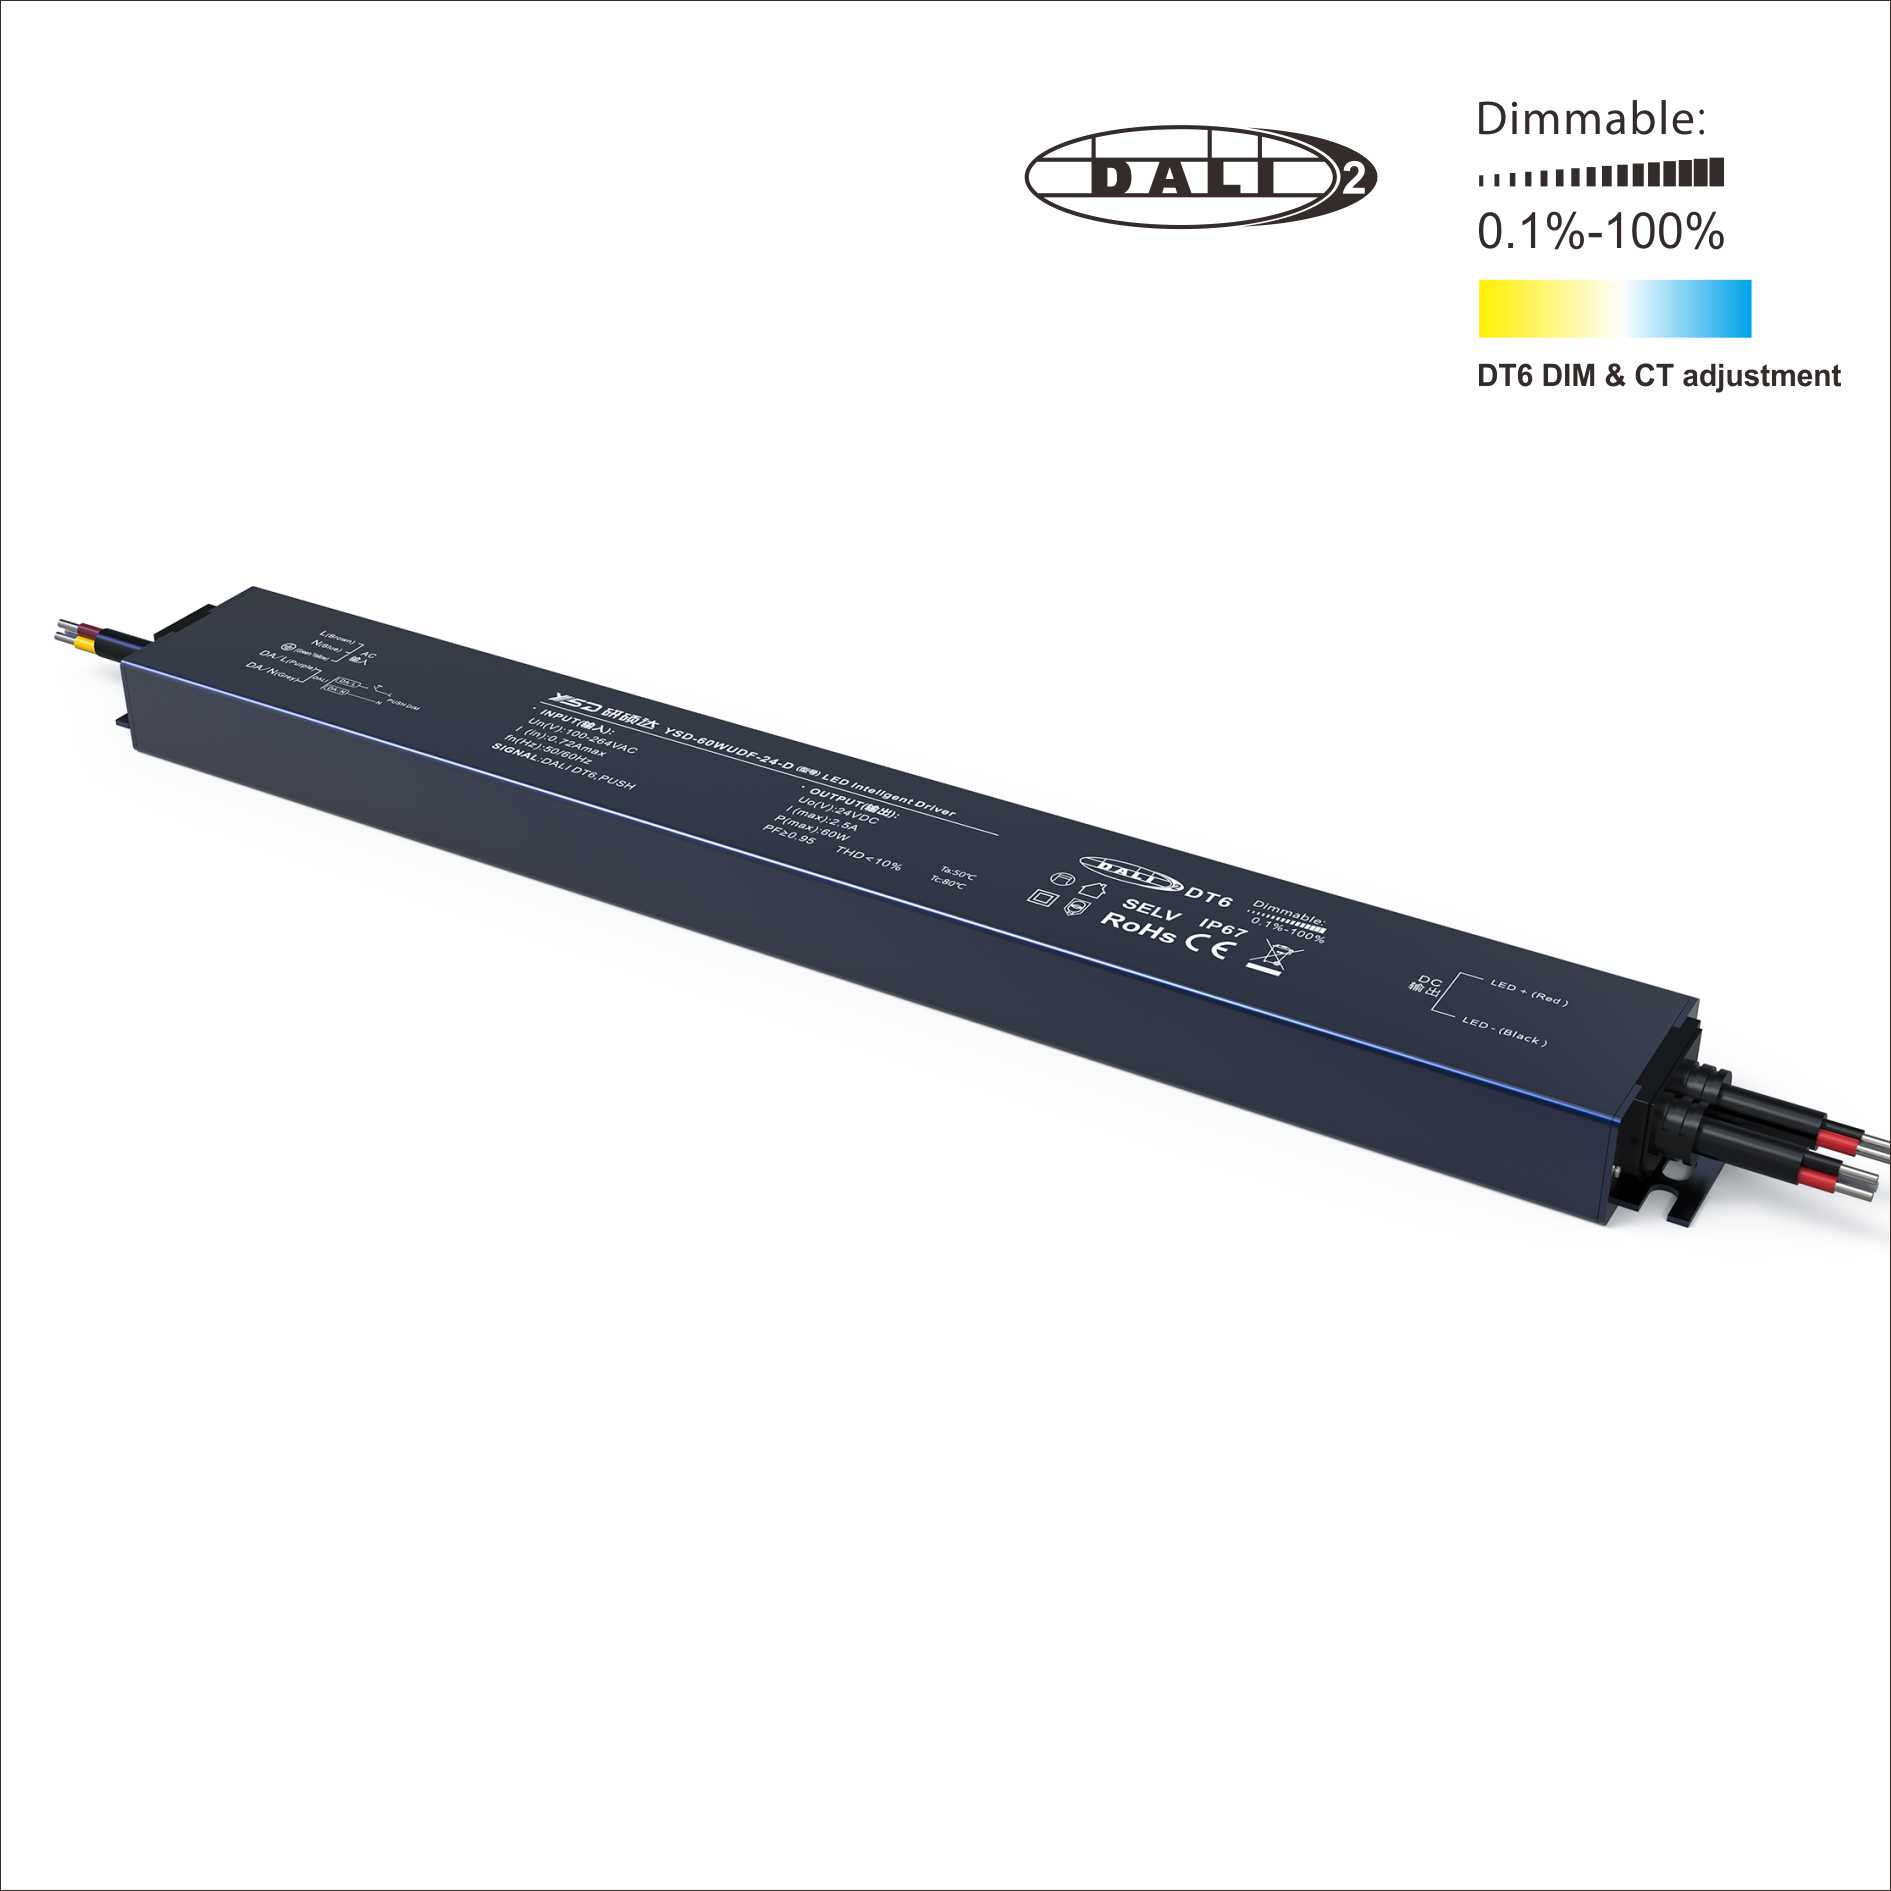 12/24V 60W DALI DT6 PUSH  Dimmable Waterproof LED Power Supply